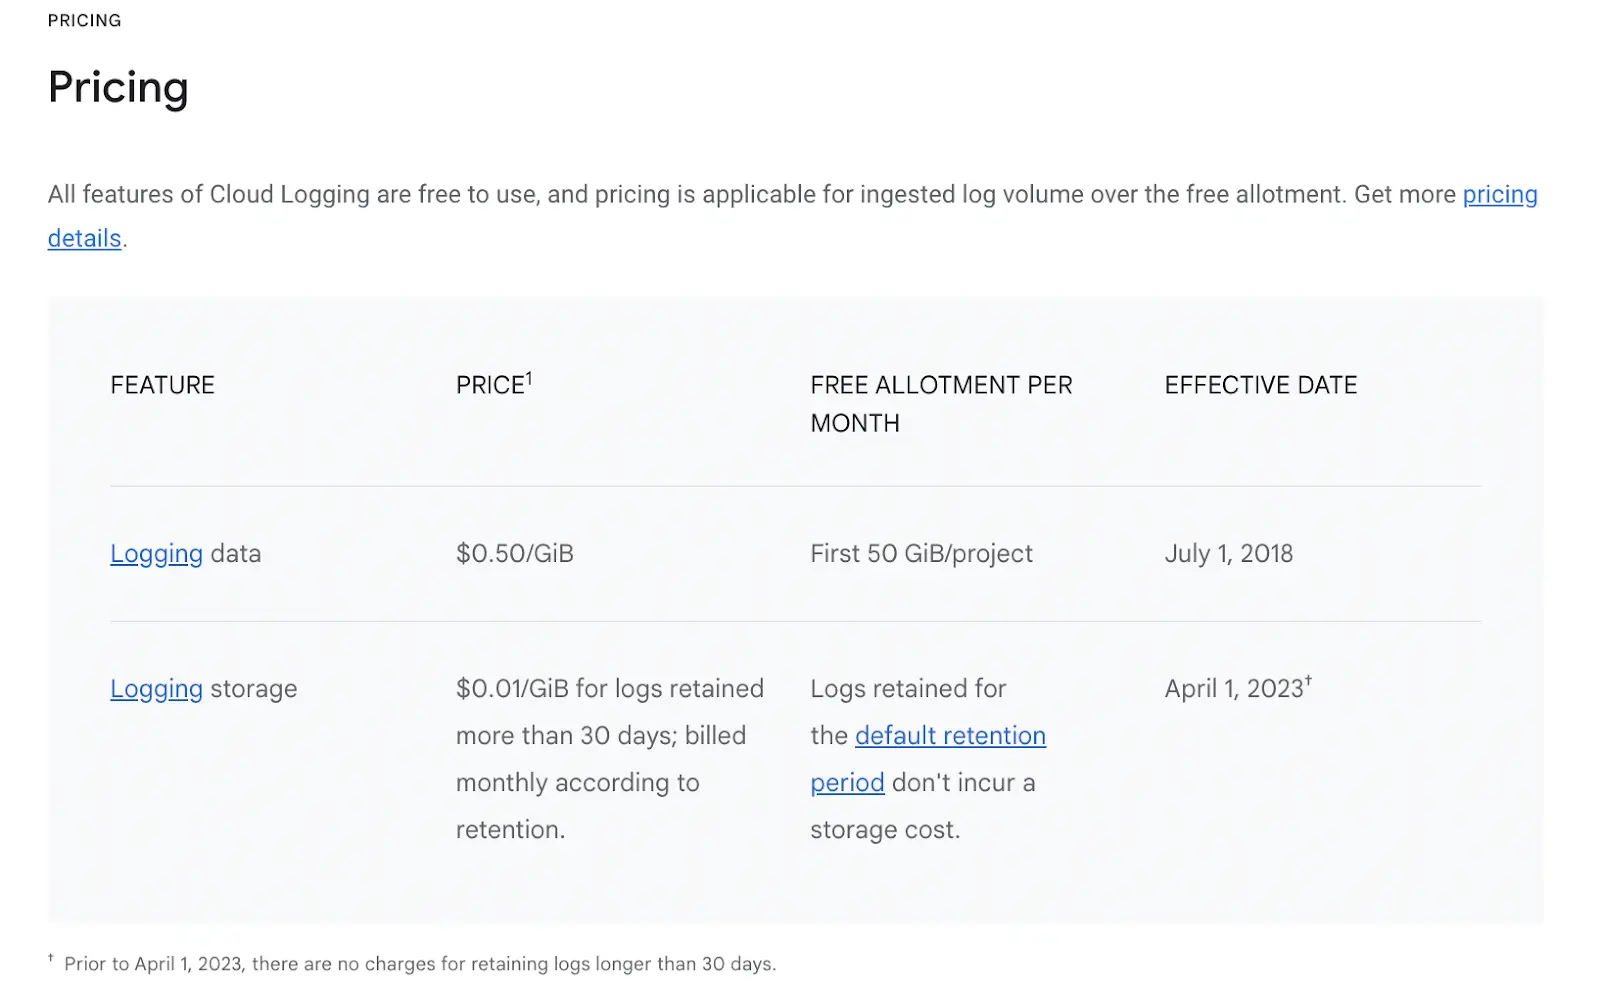 n Google Cloud, logging storage is 50 times more expensive than logging data